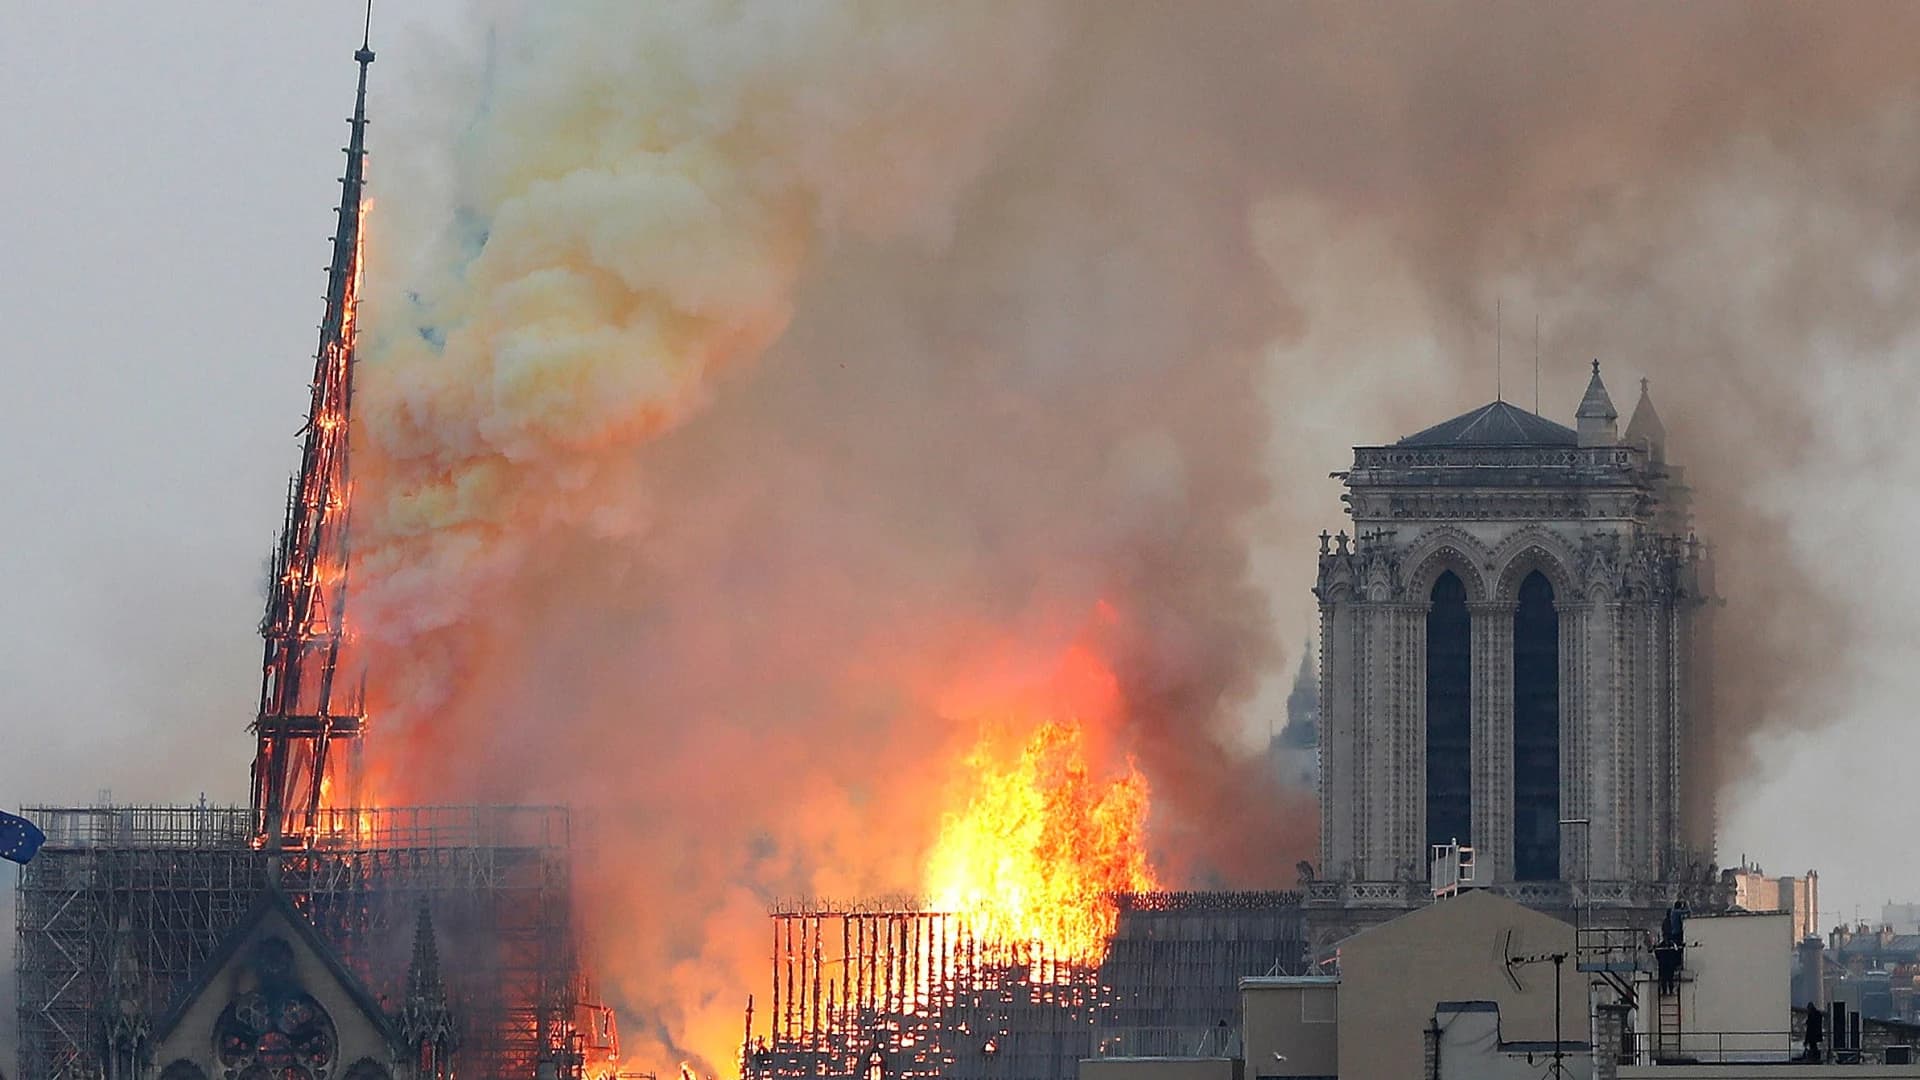 Massive fire engulfs beloved Notre Dame Cathedral in Paris